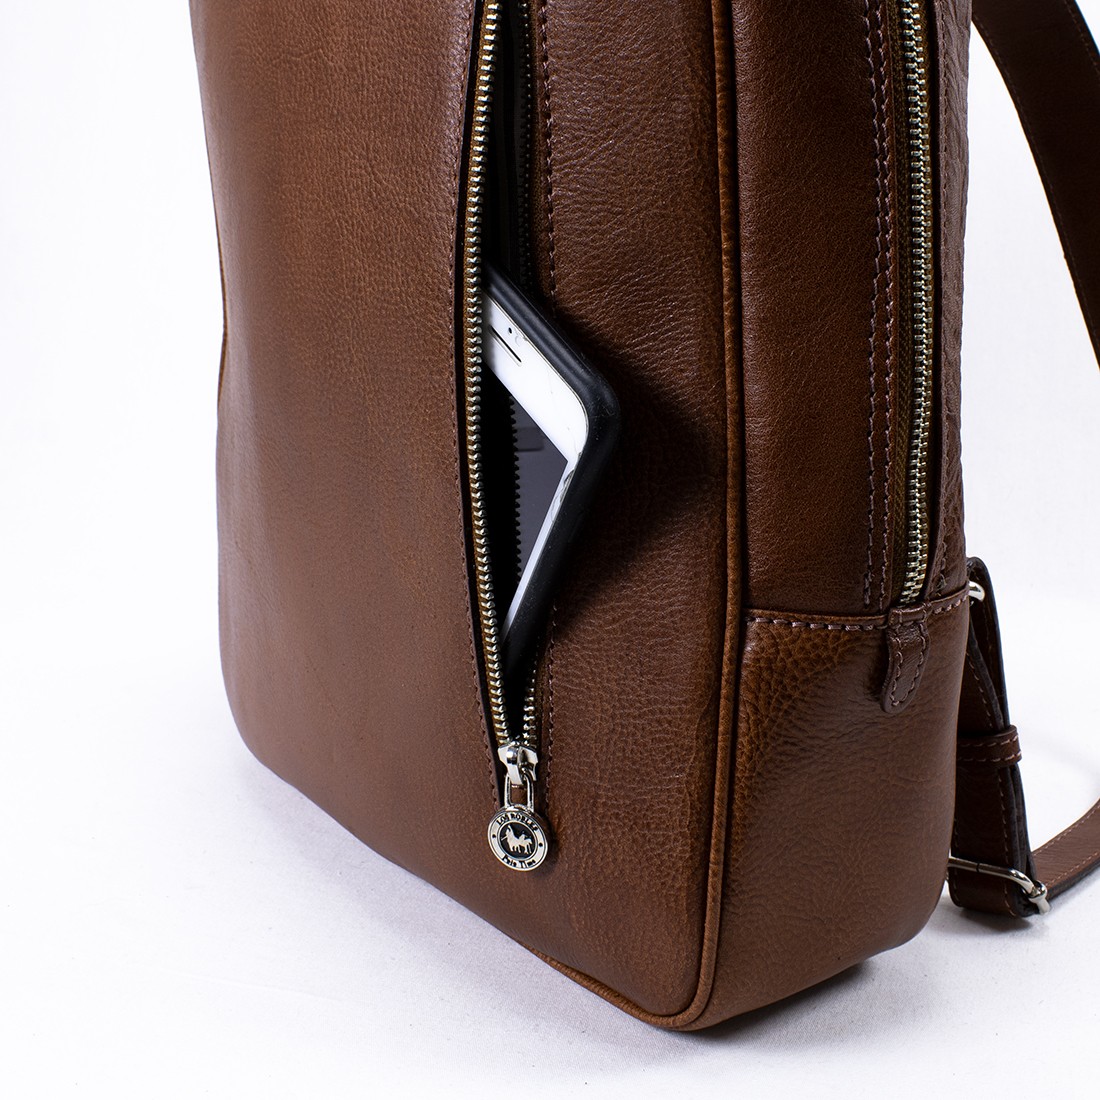 High quality leather notebook backpack|El